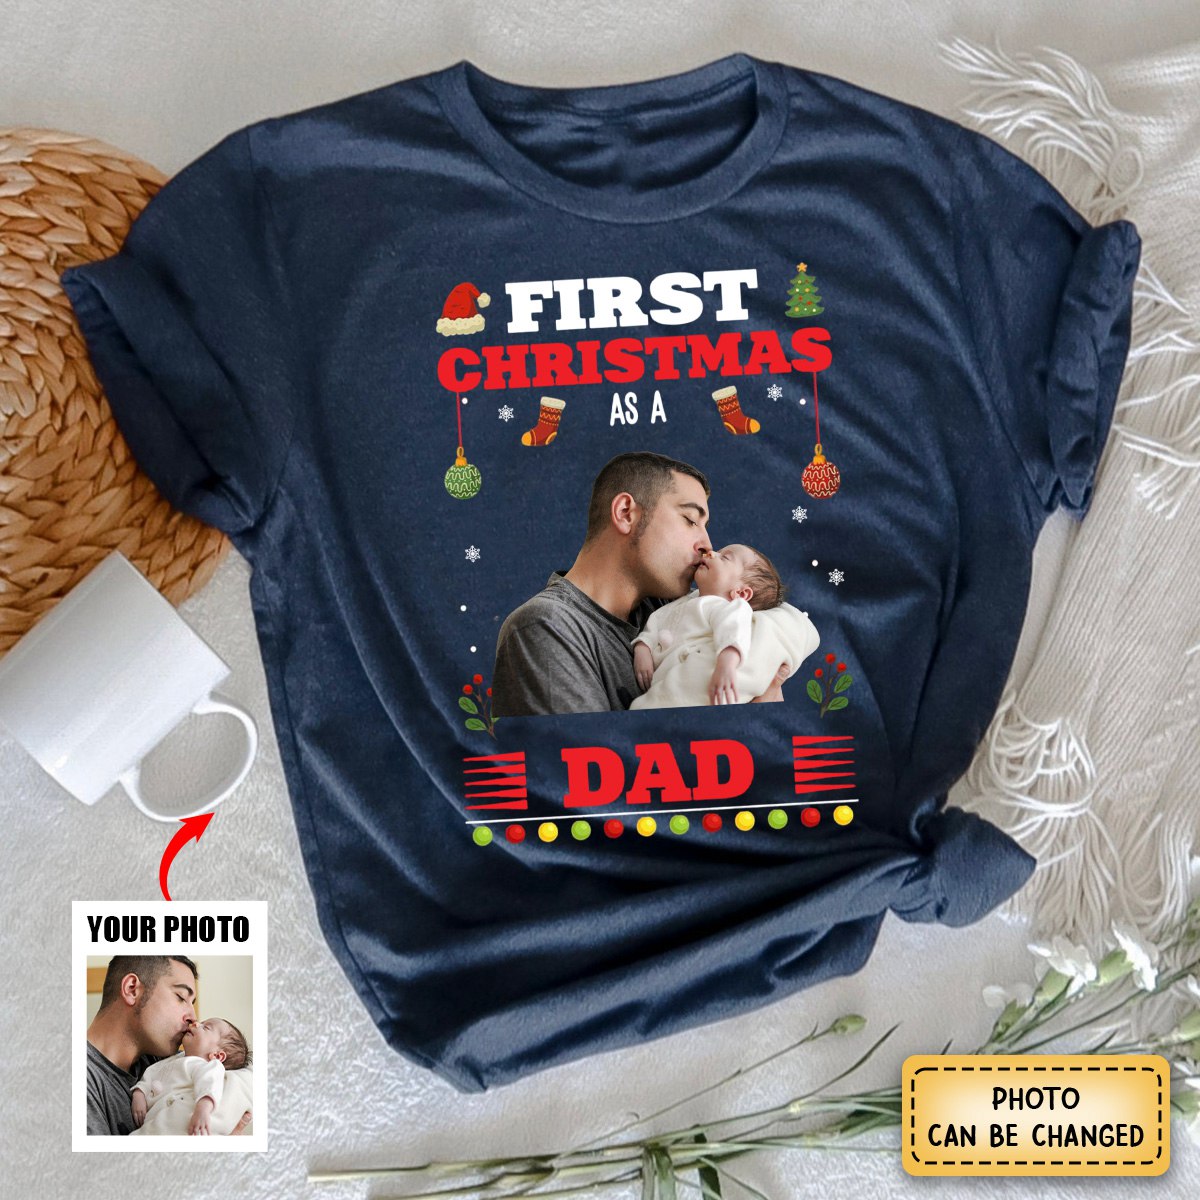 First Christmas As A Dad - Personalized Photo T-Shirt